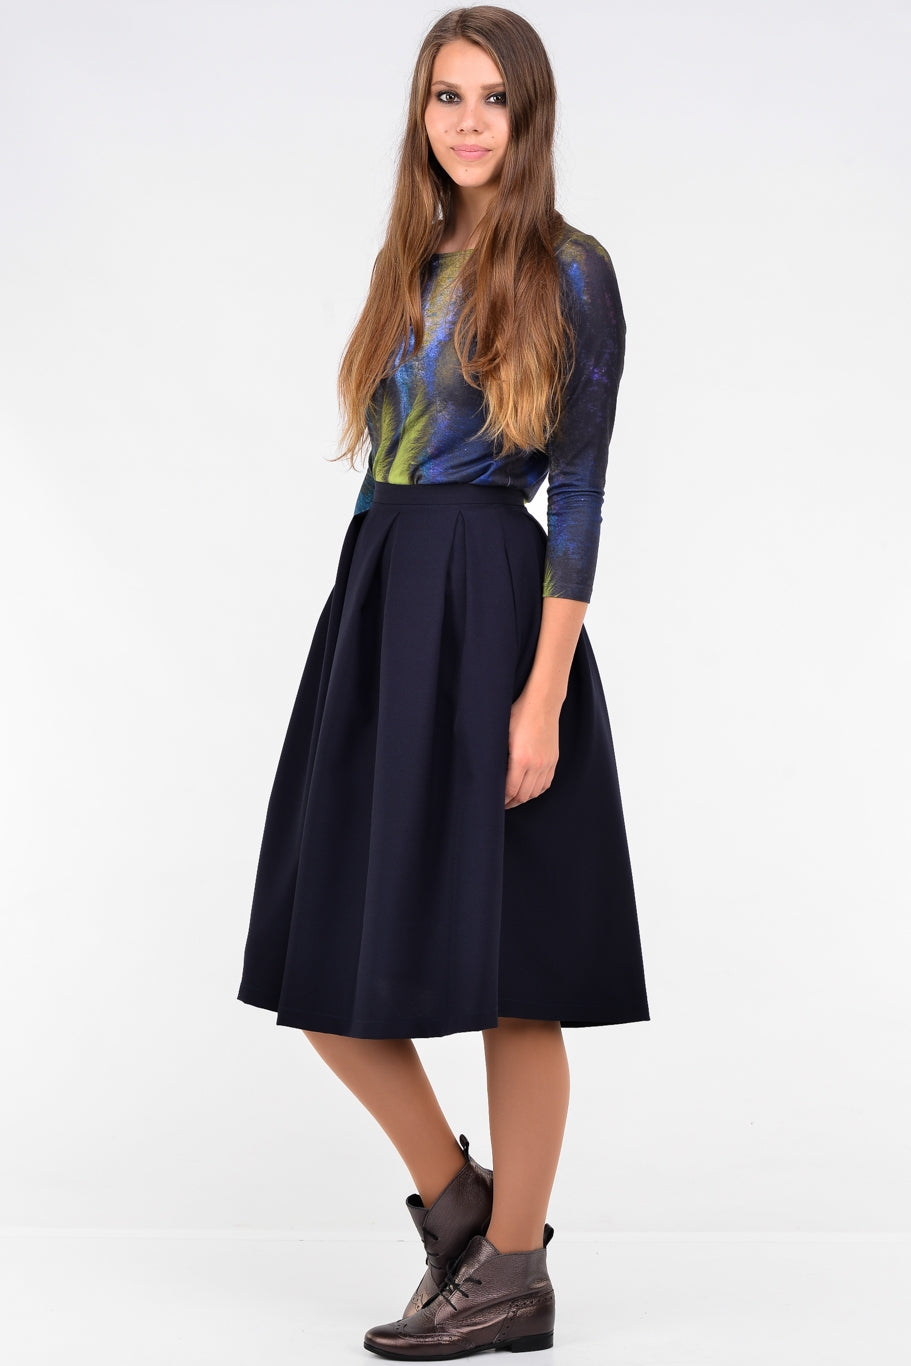 Blue navy knee length skirts with pleats and pockets